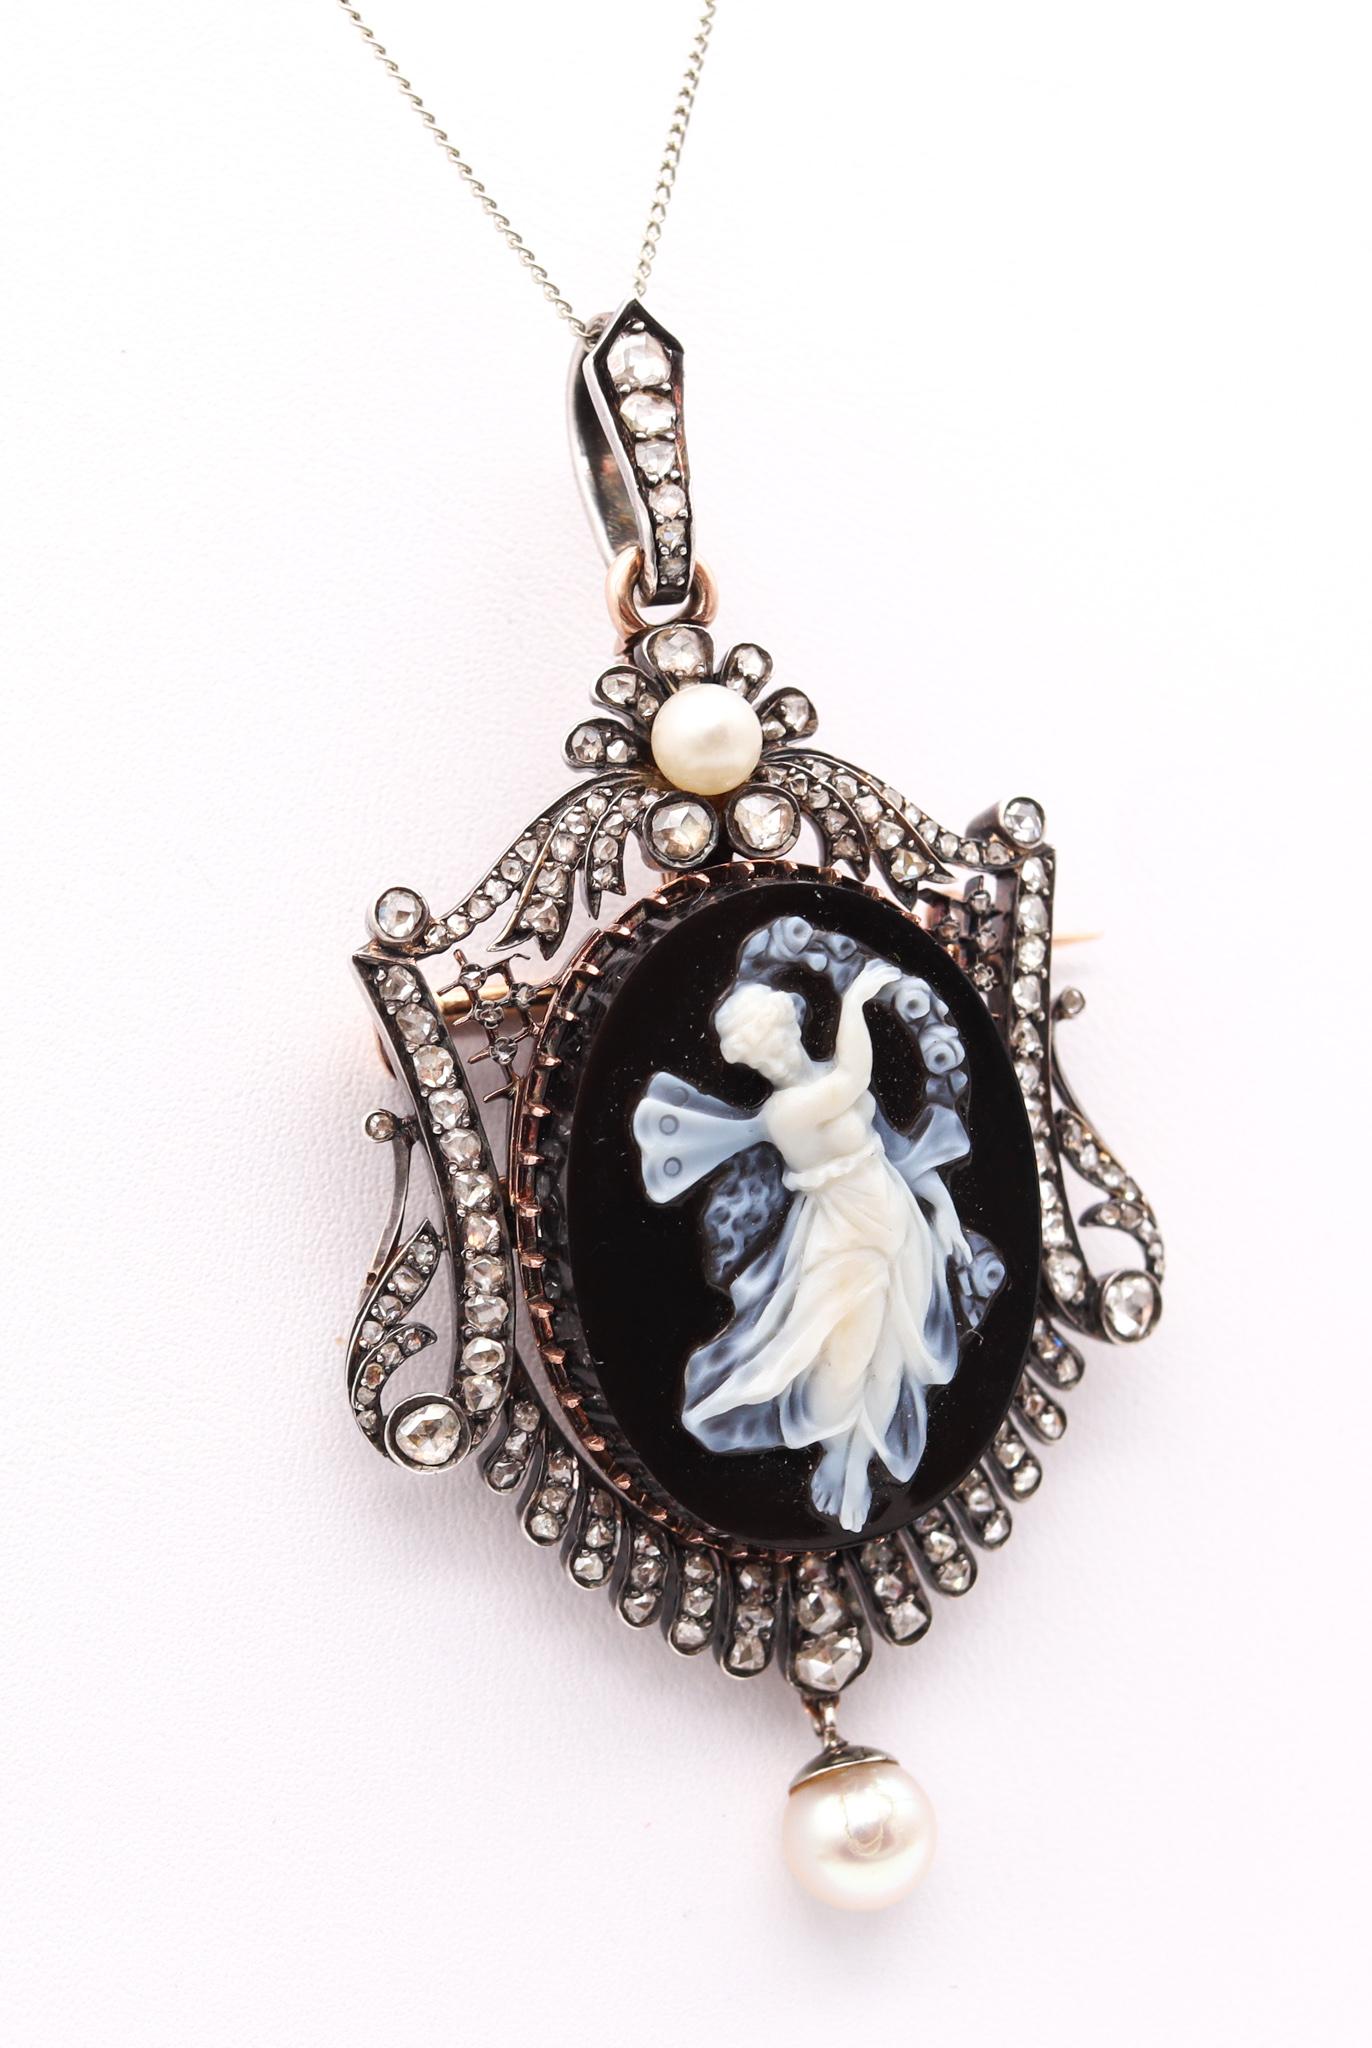 French neo classic convertible pendant-brooch.

Magnificent and rare antique piece, created in Paris France during the second half of the 19th century, circa 1850-1860. This gorgeous convertible piece, is a pendant and a brooch that has been crafted